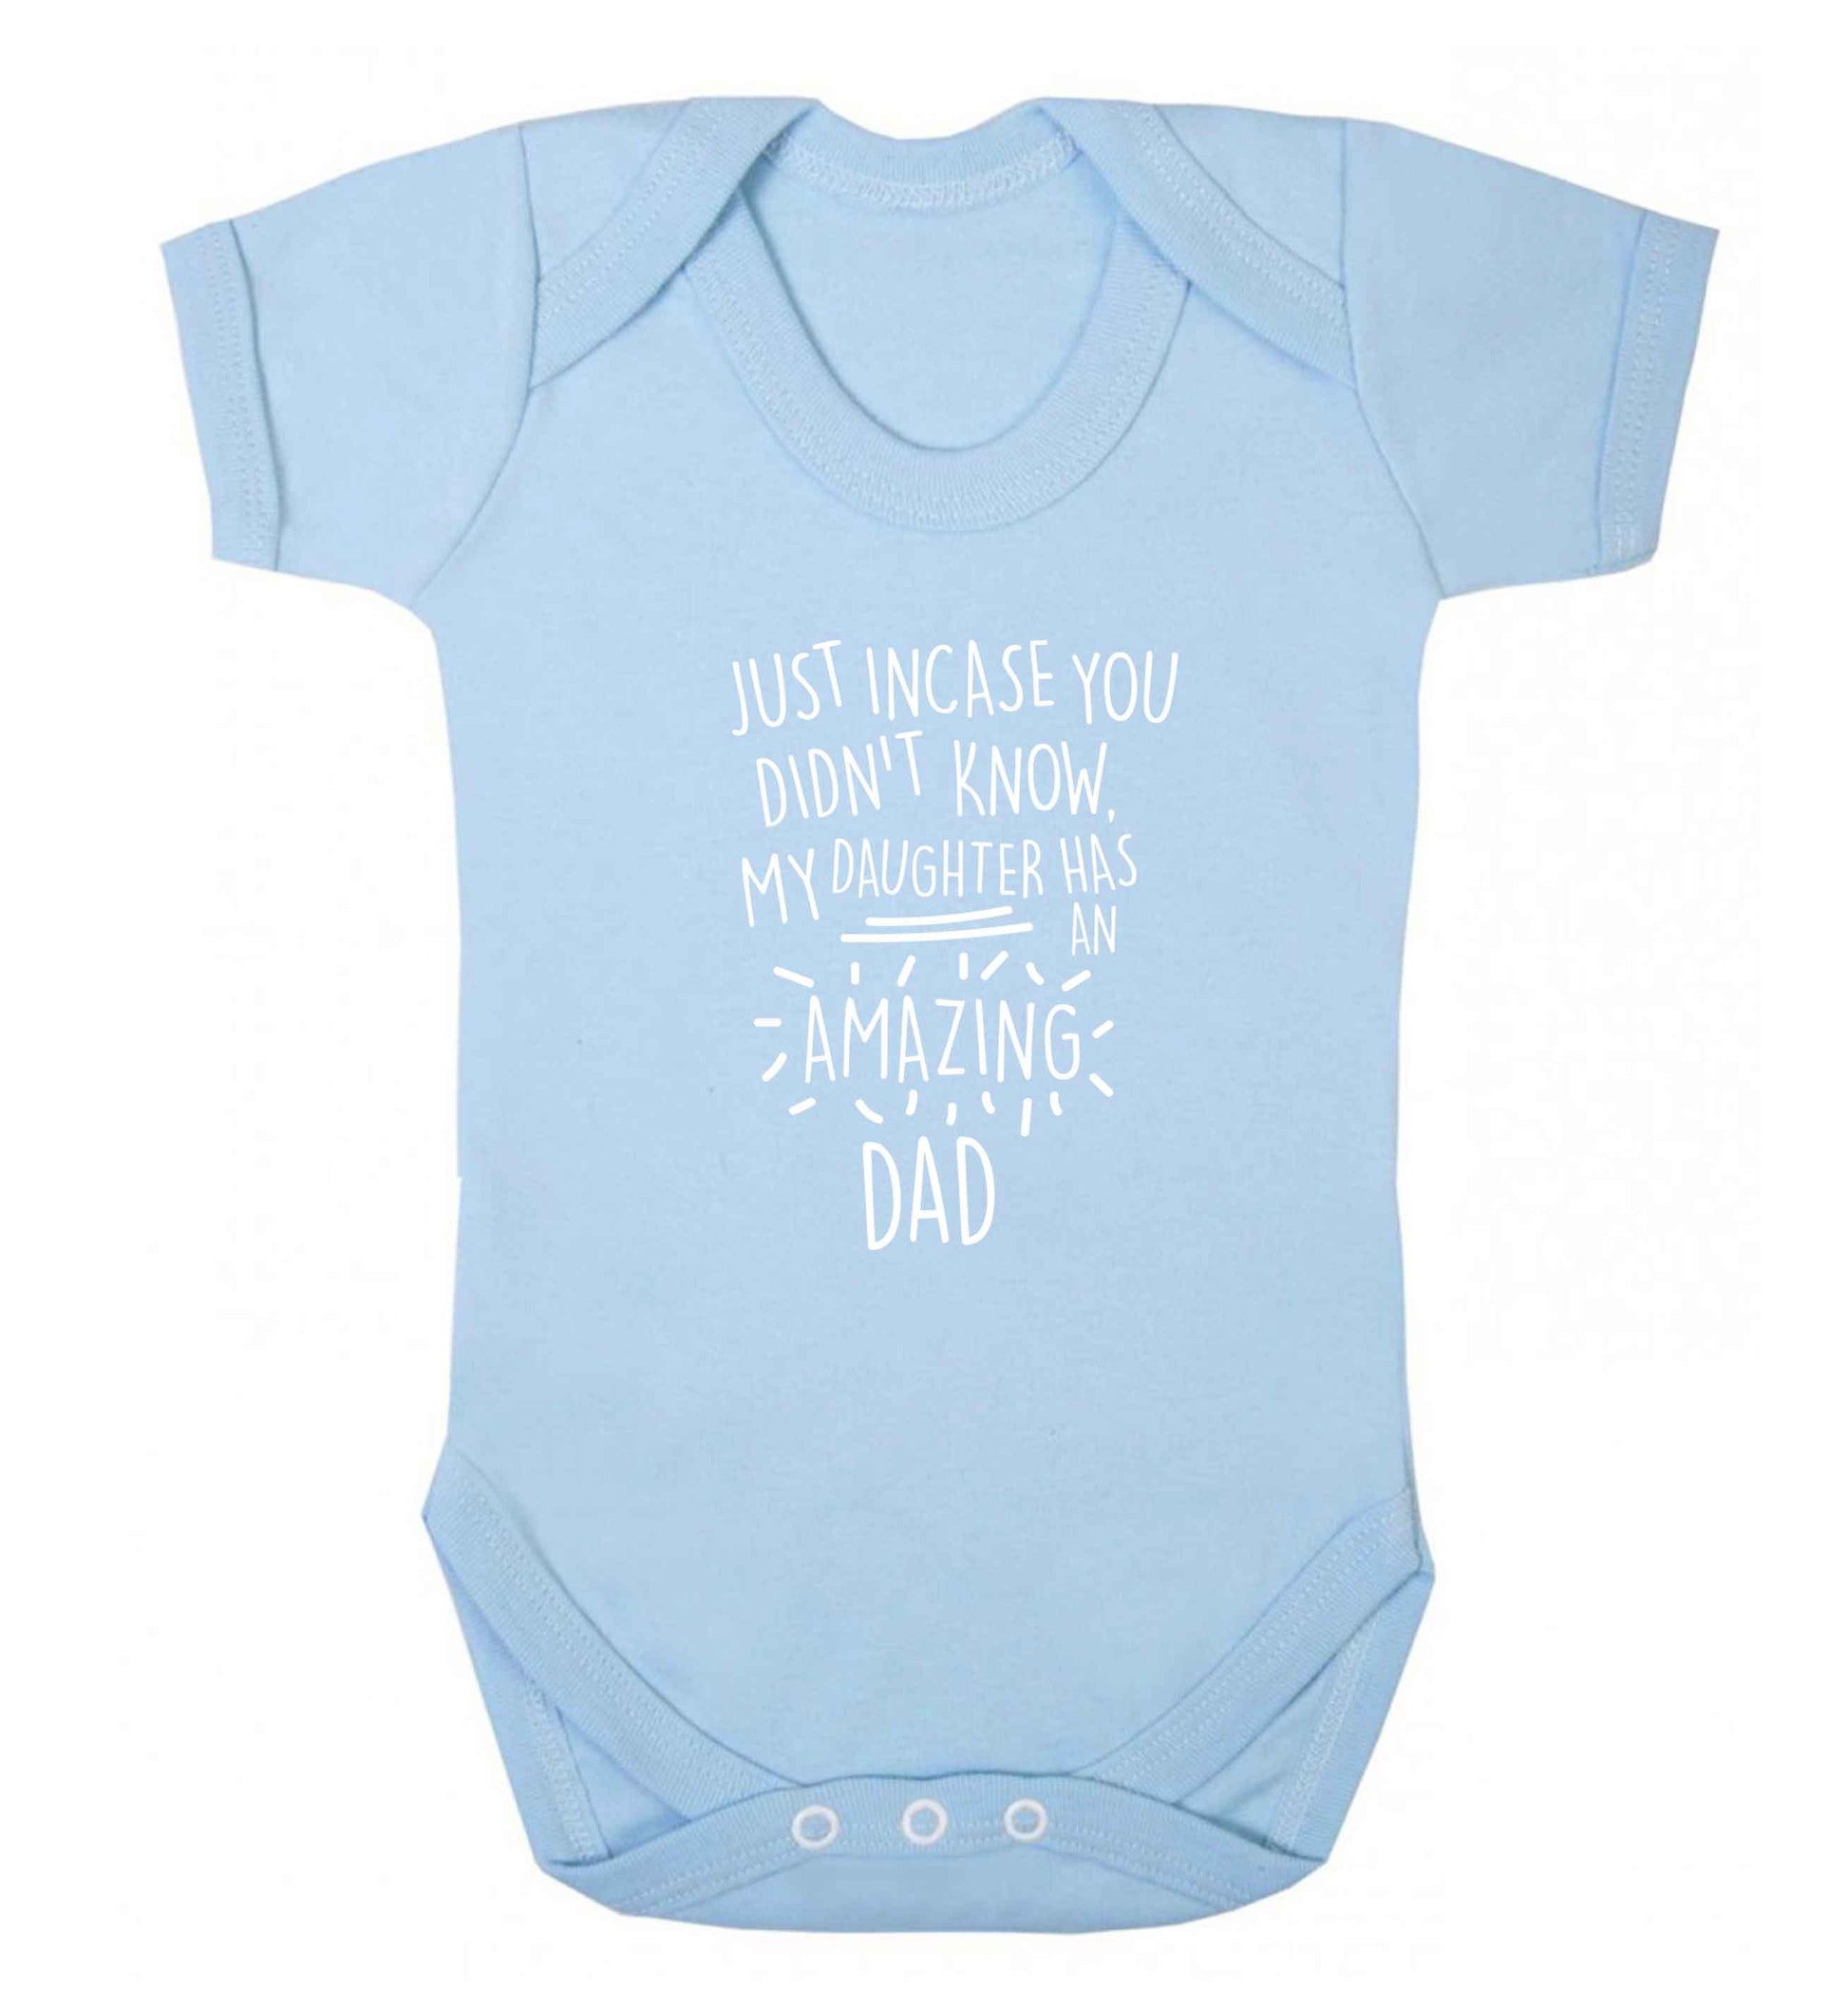 Just incase you didn't know my daughter has an amazing dad baby vest pale blue 18-24 months